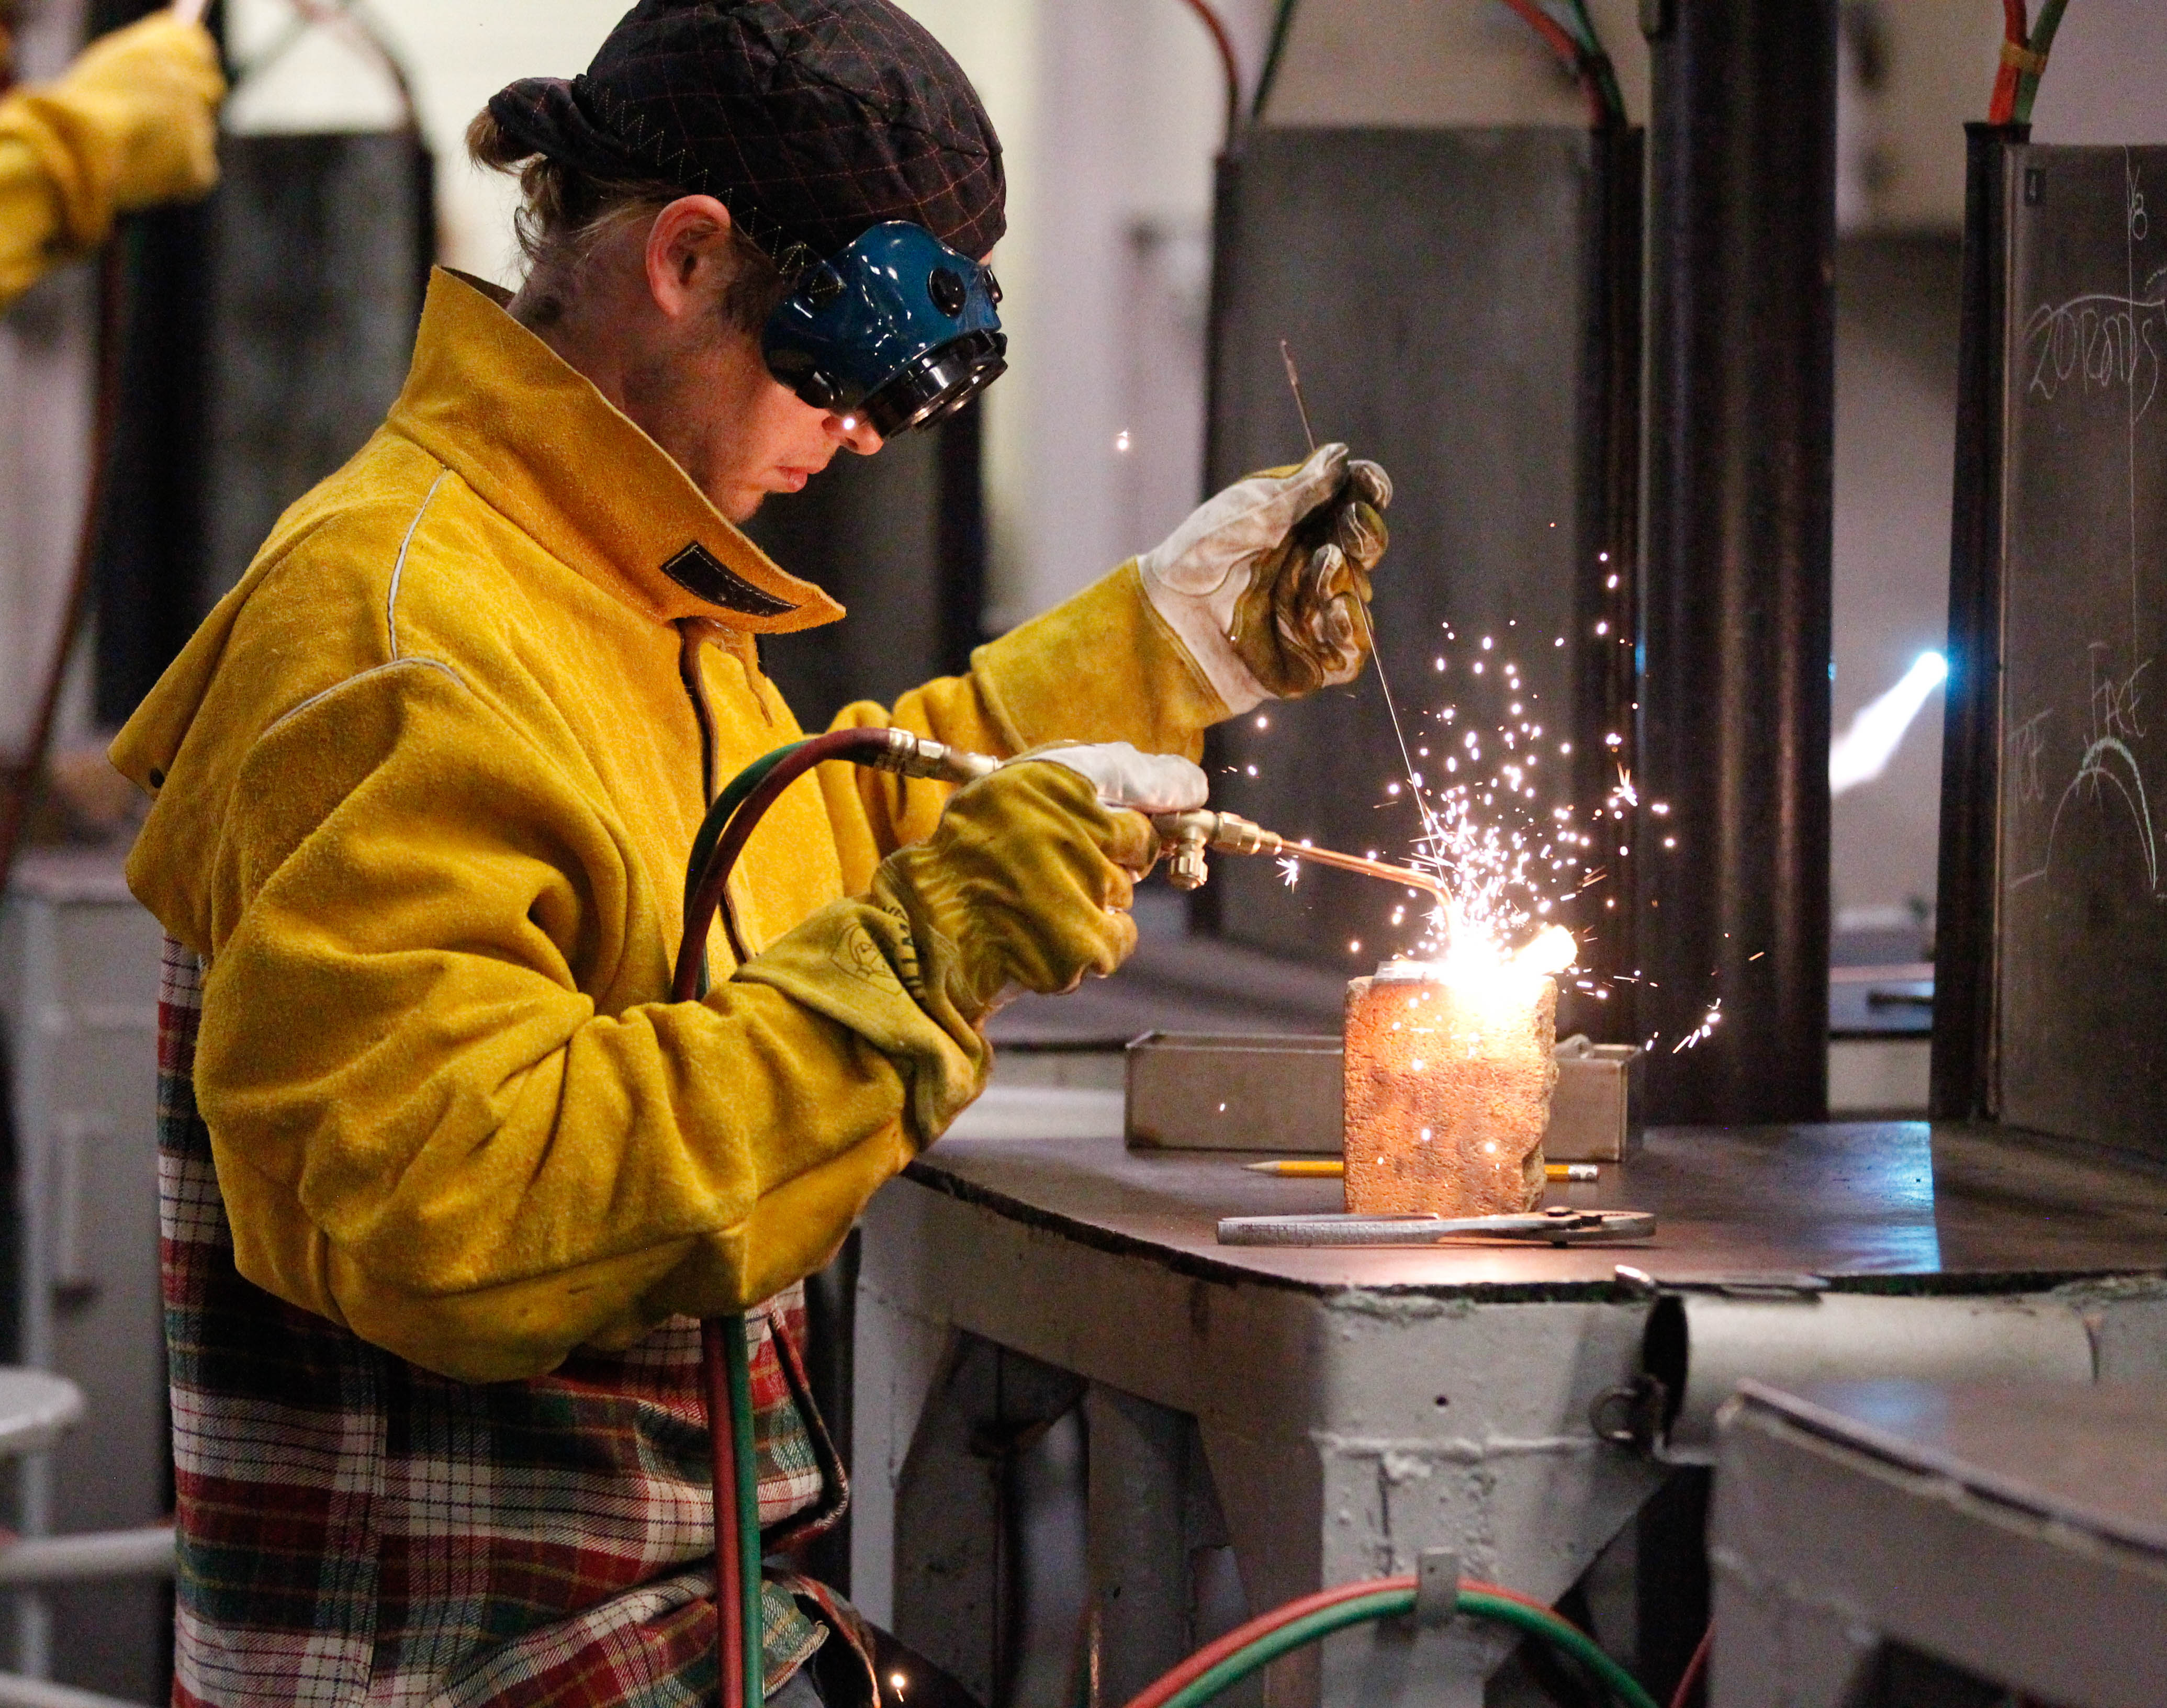 Light a flame, weld some metal